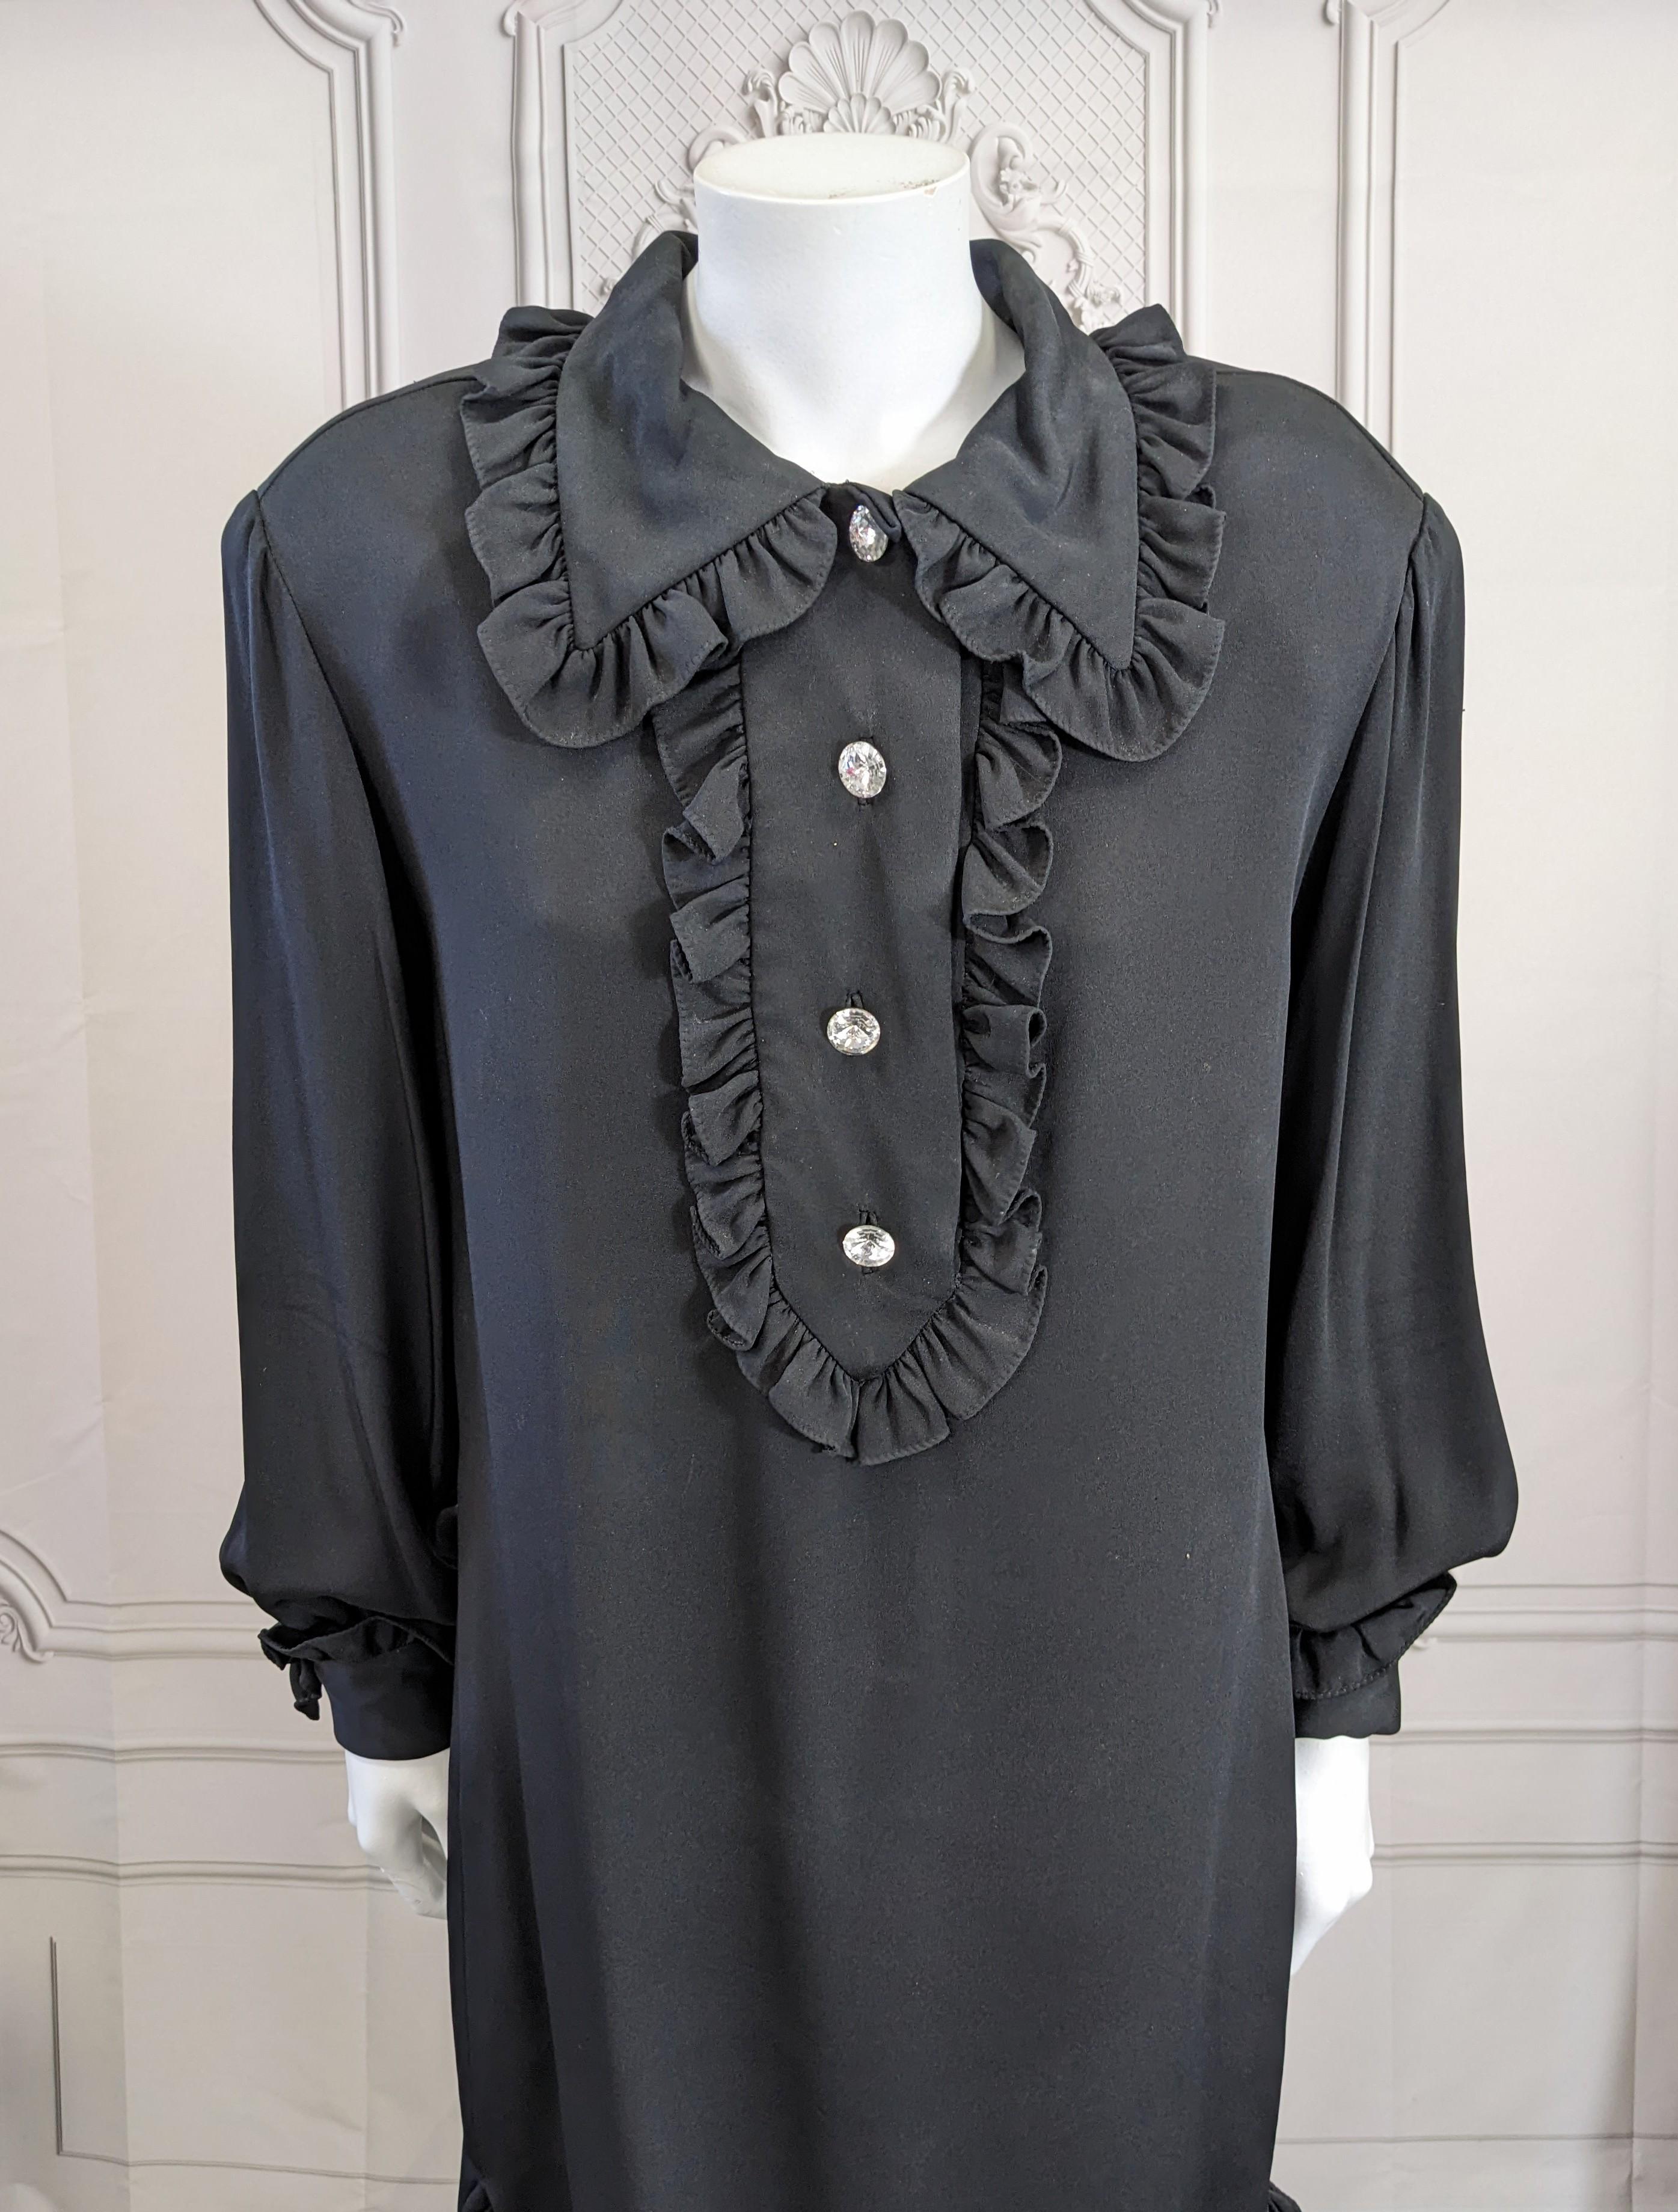 Bill Blass Ruffle Trimmed Shirt Dress in heavy silk crepe with large diamonte buttons. Easy straight cut with large shoulder pads with ruffle trimmed placket and cuffs. 
Size 8, straight loose cut. Would work belted as well. 1980's USA. 